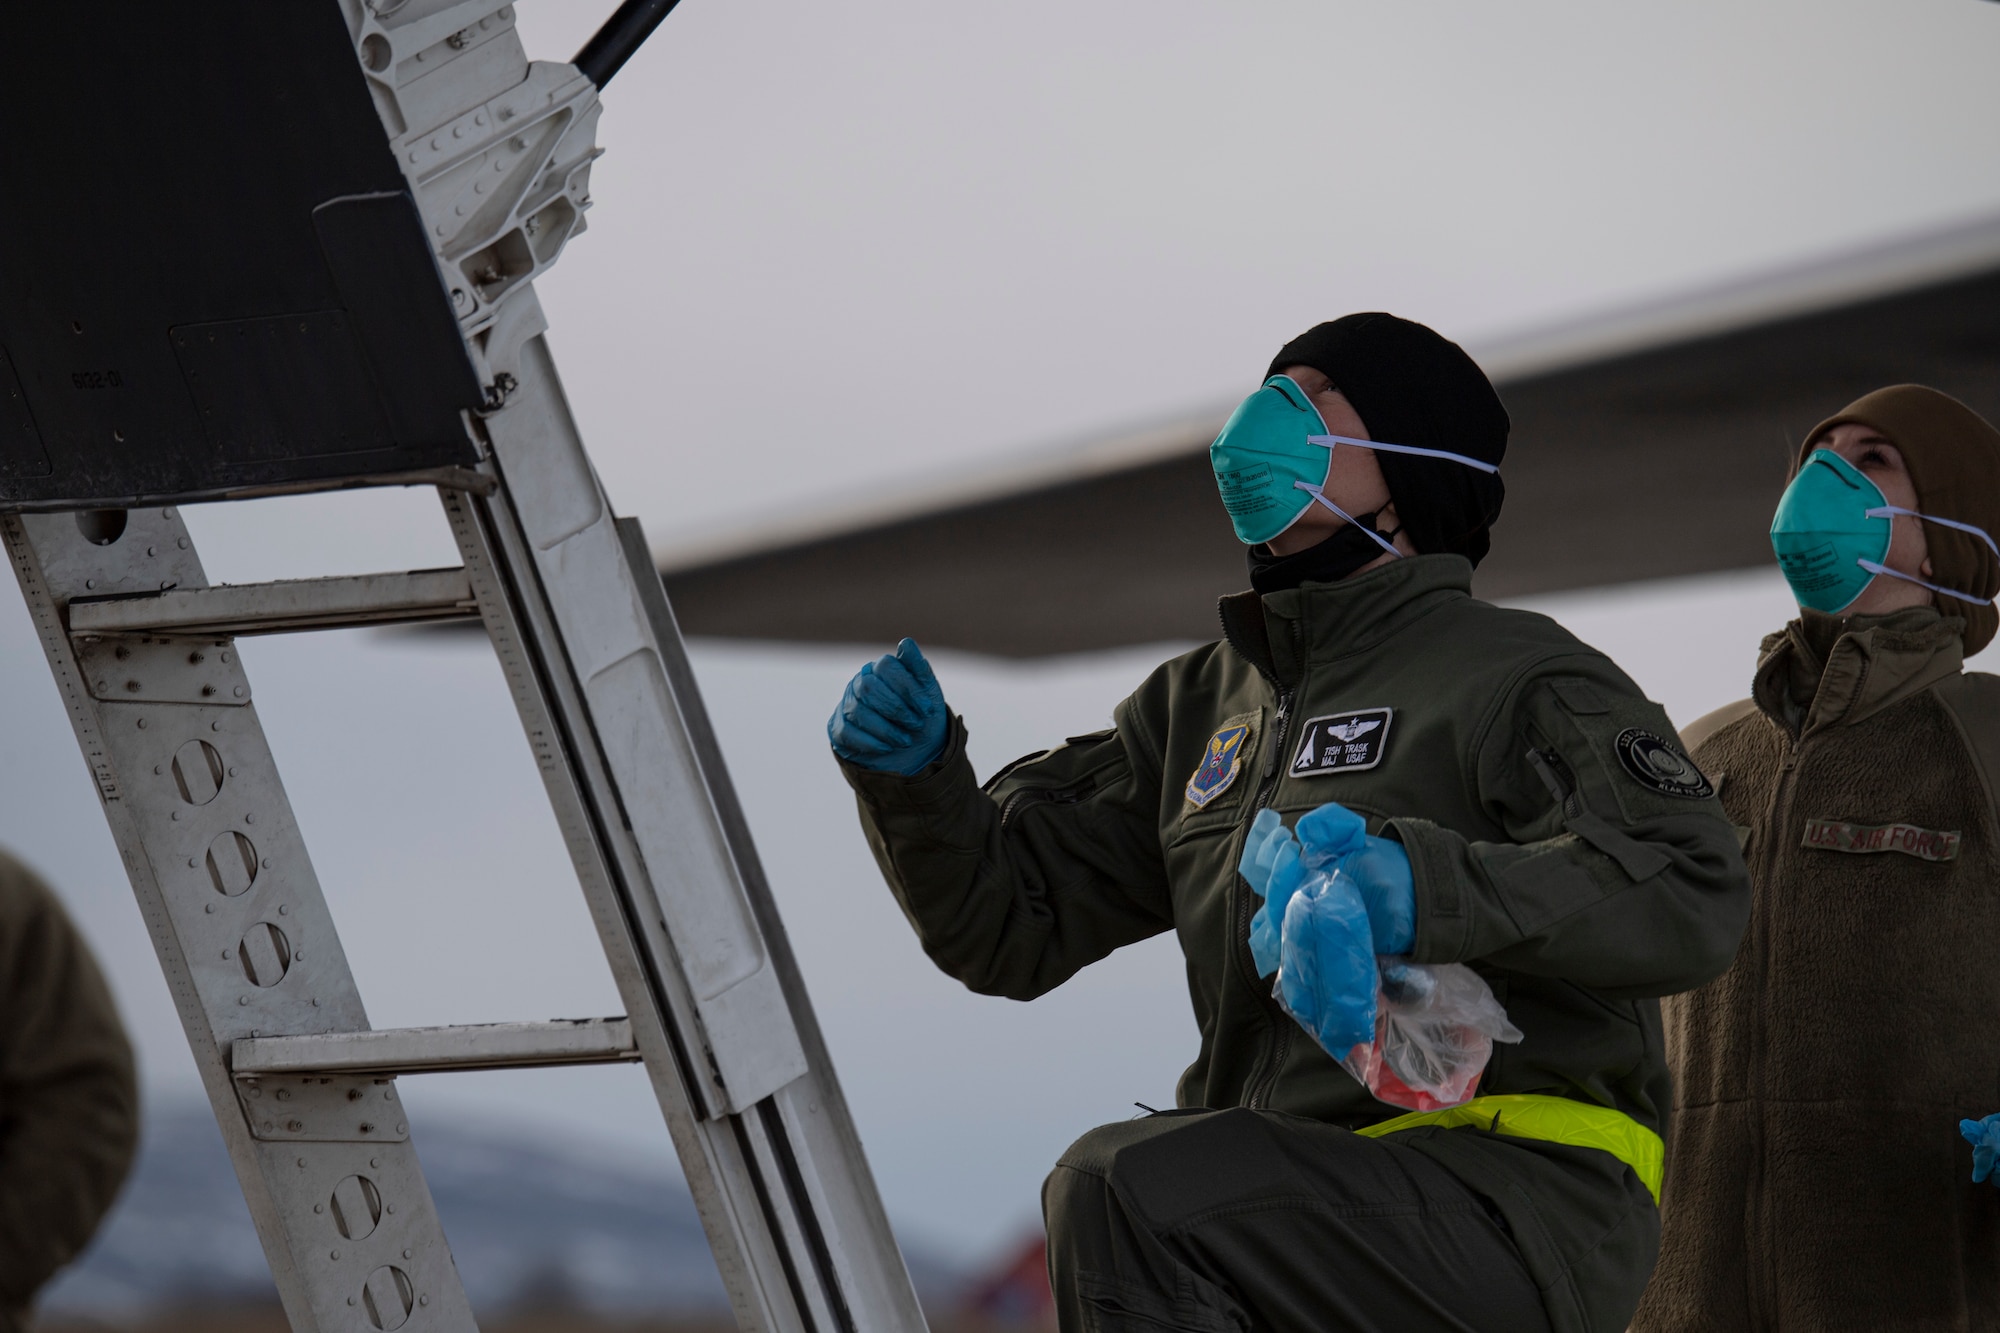 Airmen assigned to the 9th Expeditionary Bomb Squadron prepare to sanitize the cockpit of a B-1B Lancer at Ørland Air Force Station, Norway, Feb. 22, 2021. The 9th EBS underwent a variety of  COVID-19 preventative measures in order to be in compliance with both host nation and Department of Defense requirements. (U.S. Air Force photo by Airman 1st Class Colin Hollowell)